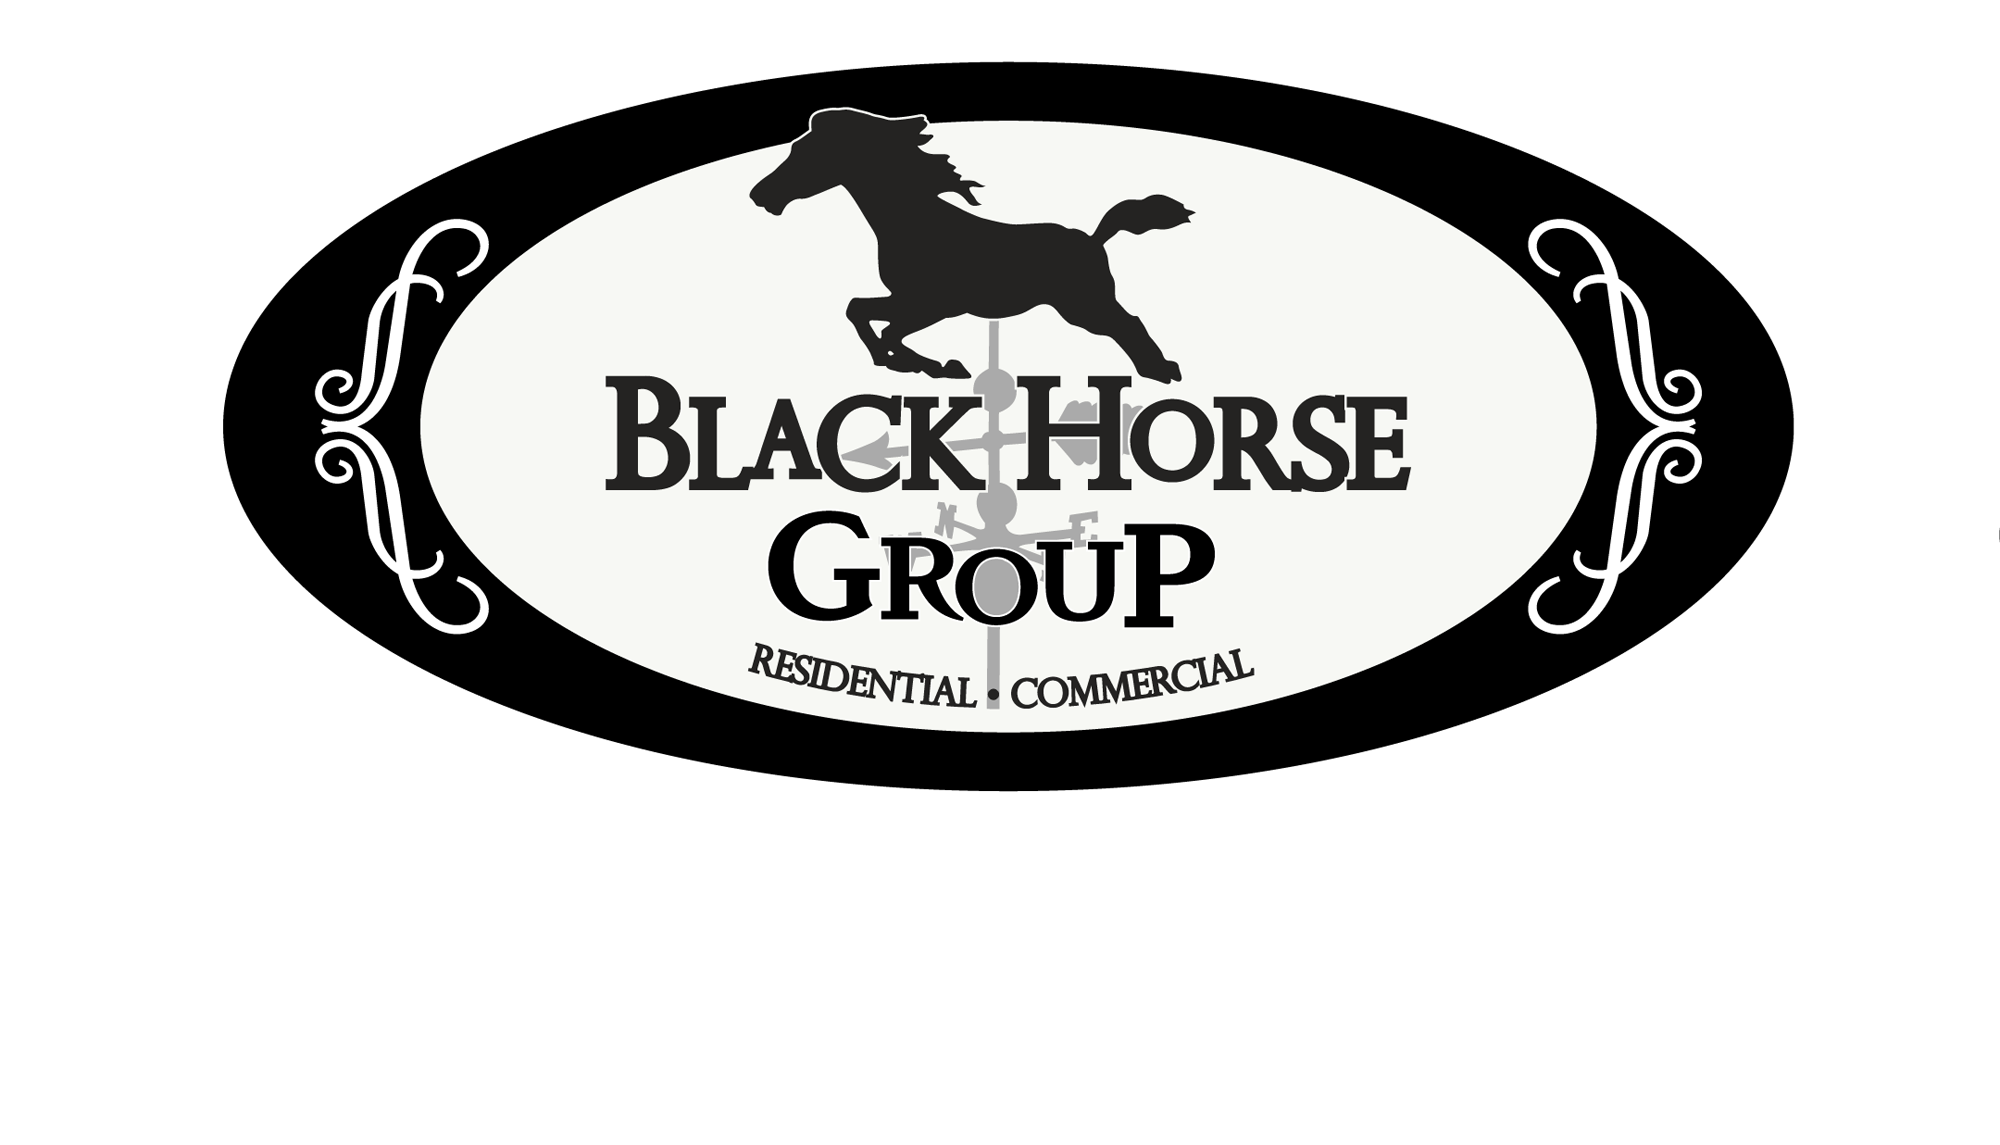 The Black Horse Group